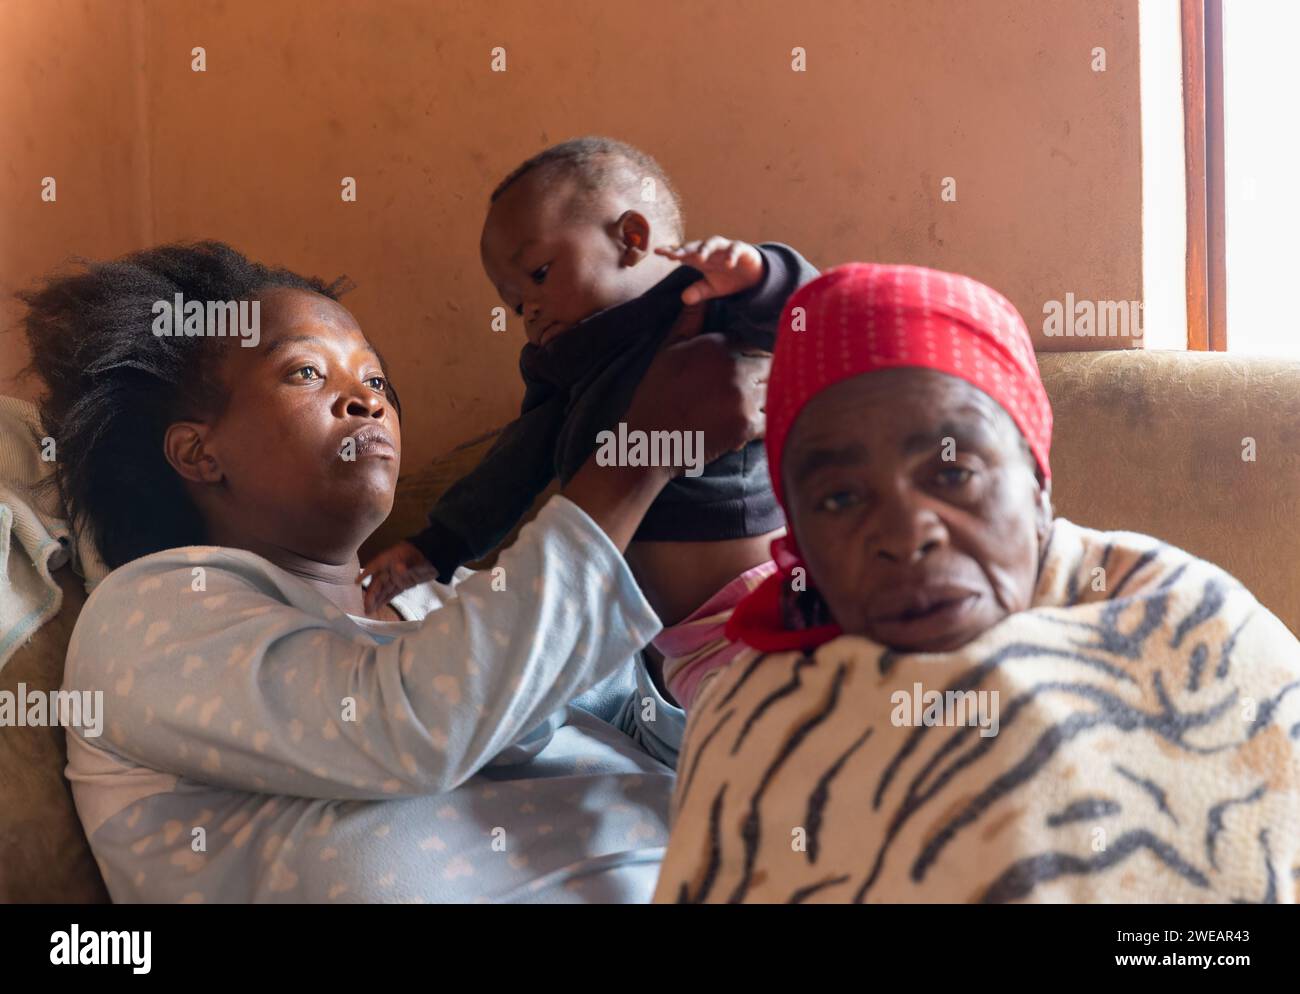 african refugee destitute family  bonding  together in the corner of a room, poverty, inside the house Stock Photo